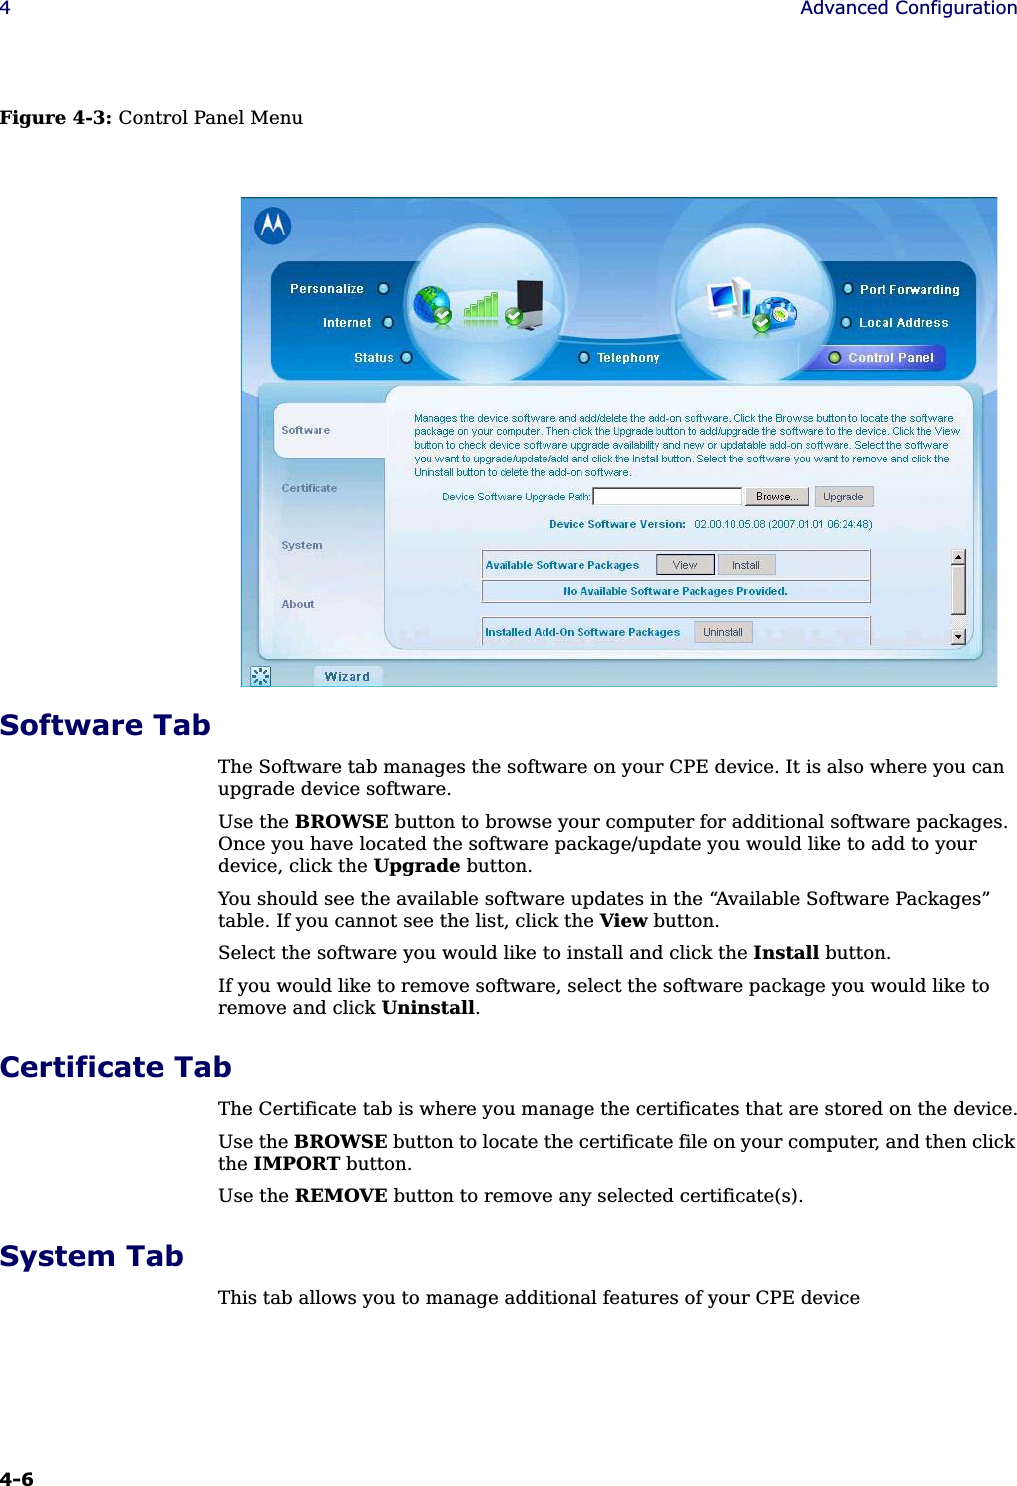 4-6 4Advanced ConfigurationFigure 4-3: Control Panel MenuSoftware TabThe Software tab manages the software on your CPE device. It is also where you can upgrade device software.Use the BROWSE button to browse your computer for additional software packages. Once you have located the software package/update you would like to add to your device, click the Upgrade button.You should see the available software updates in the “Available Software Packages” table. If you cannot see the list, click the View button.Select the software you would like to install and click the Install button.If you would like to remove software, select the software package you would like to remove and click Uninstall.Certificate TabThe Certificate tab is where you manage the certificates that are stored on the device.Use the BROWSE button to locate the certificate file on your computer, and then click the IMPORT button.Use the REMOVE button to remove any selected certificate(s).System TabThis tab allows you to manage additional features of your CPE device